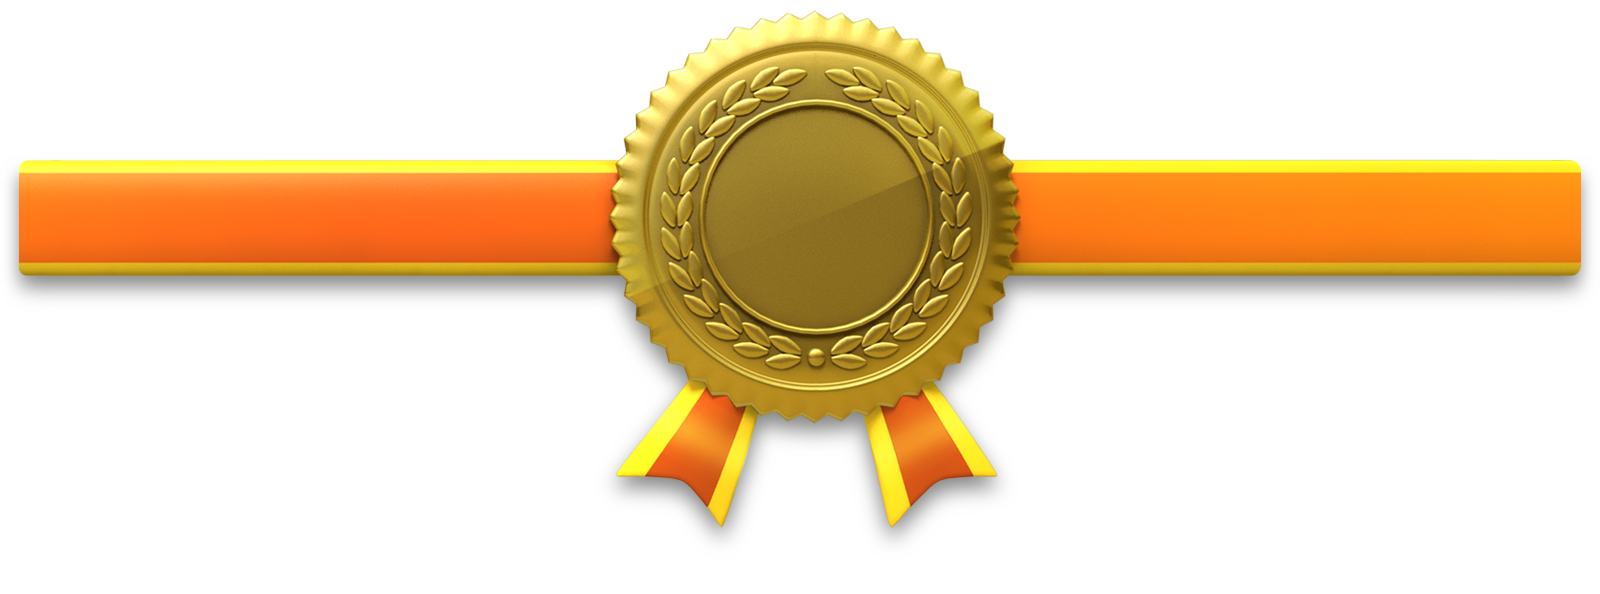 medal clipart certificate